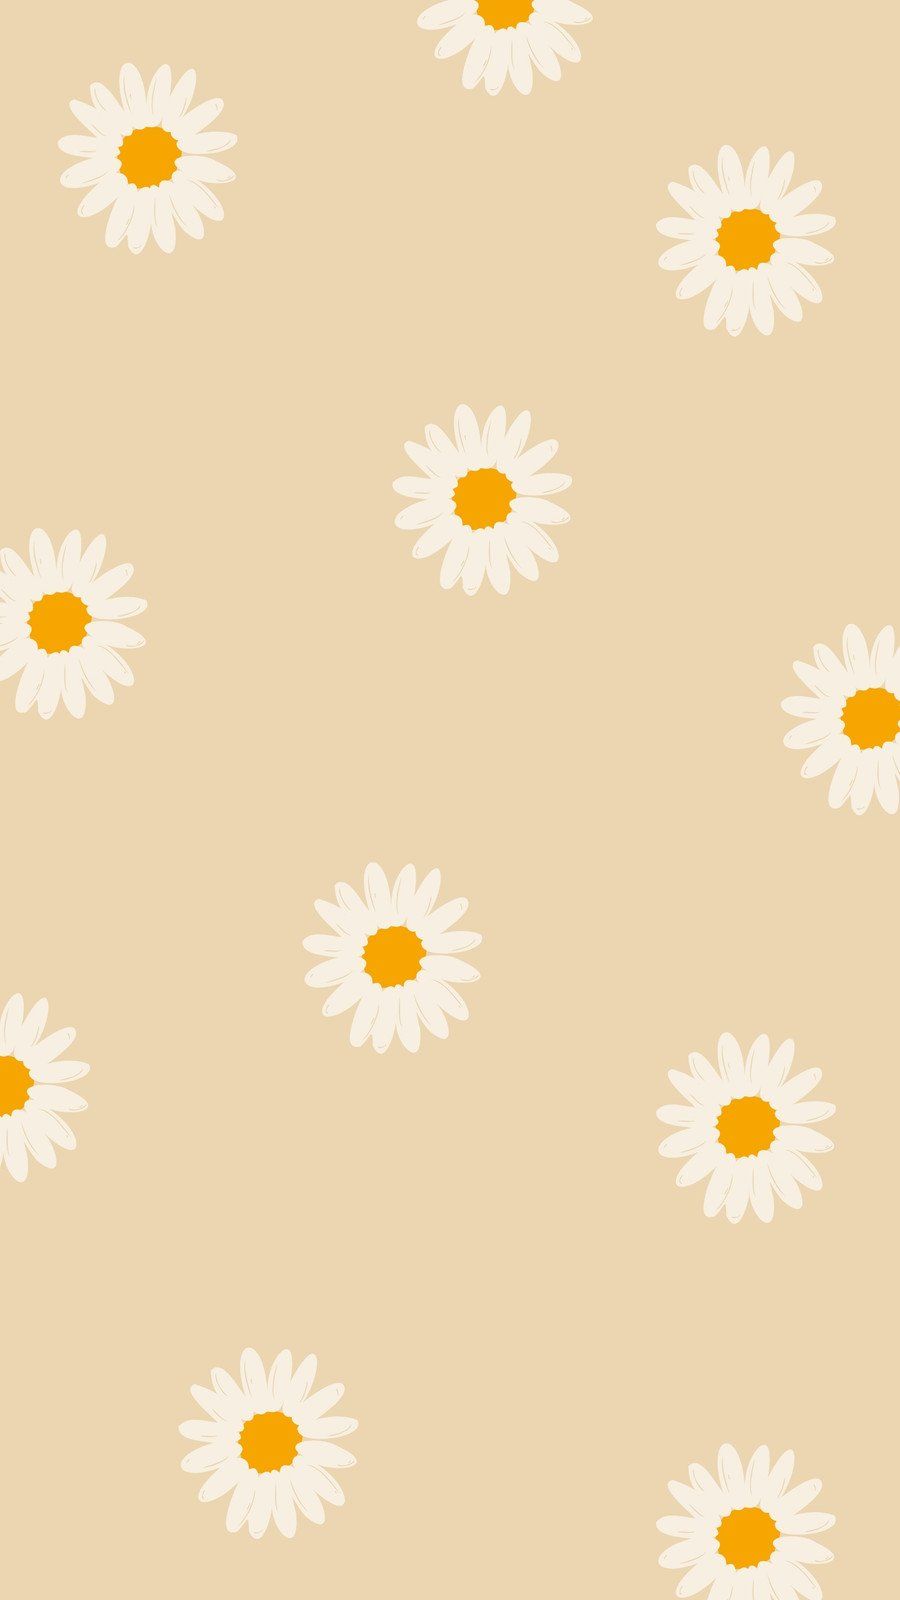 Aesthetic Daisy Wallpapers - 4k, HD Aesthetic Daisy Backgrounds on ...